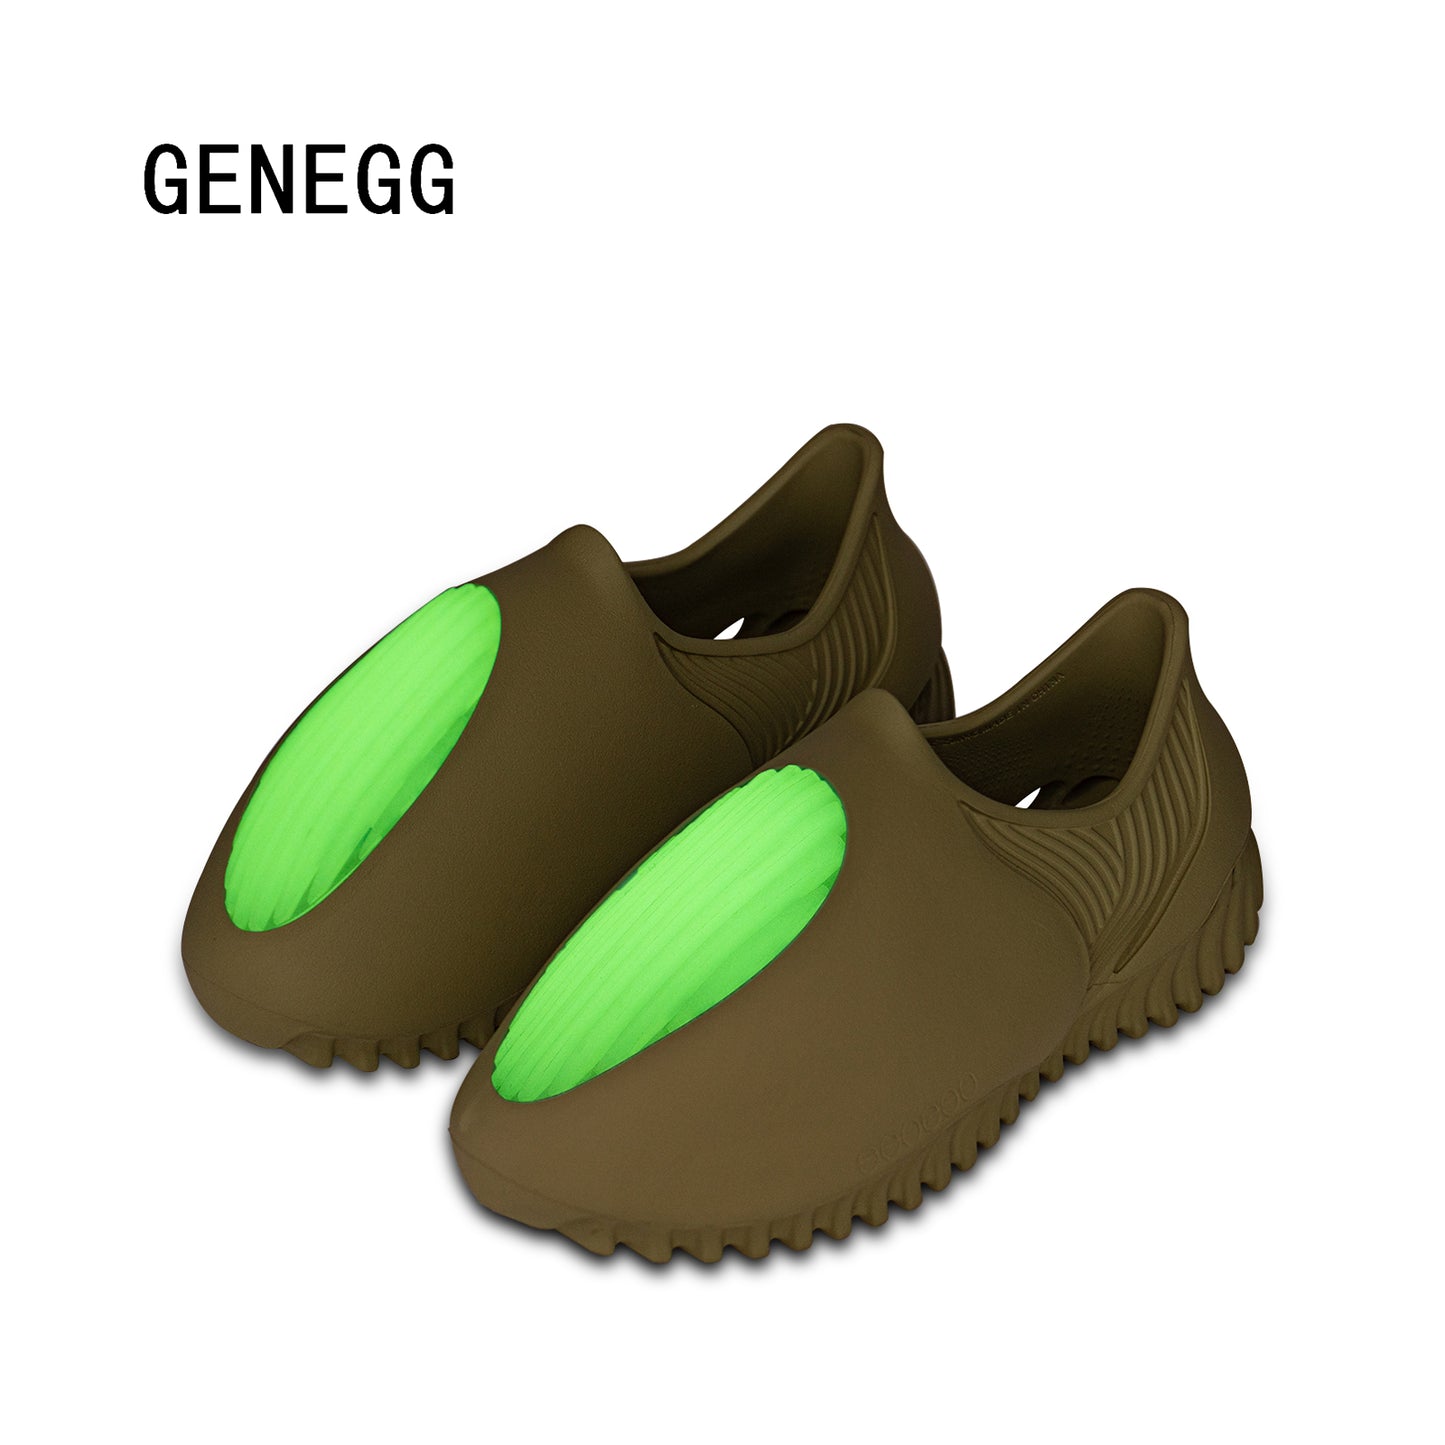 GENEGG Whale Olive Green